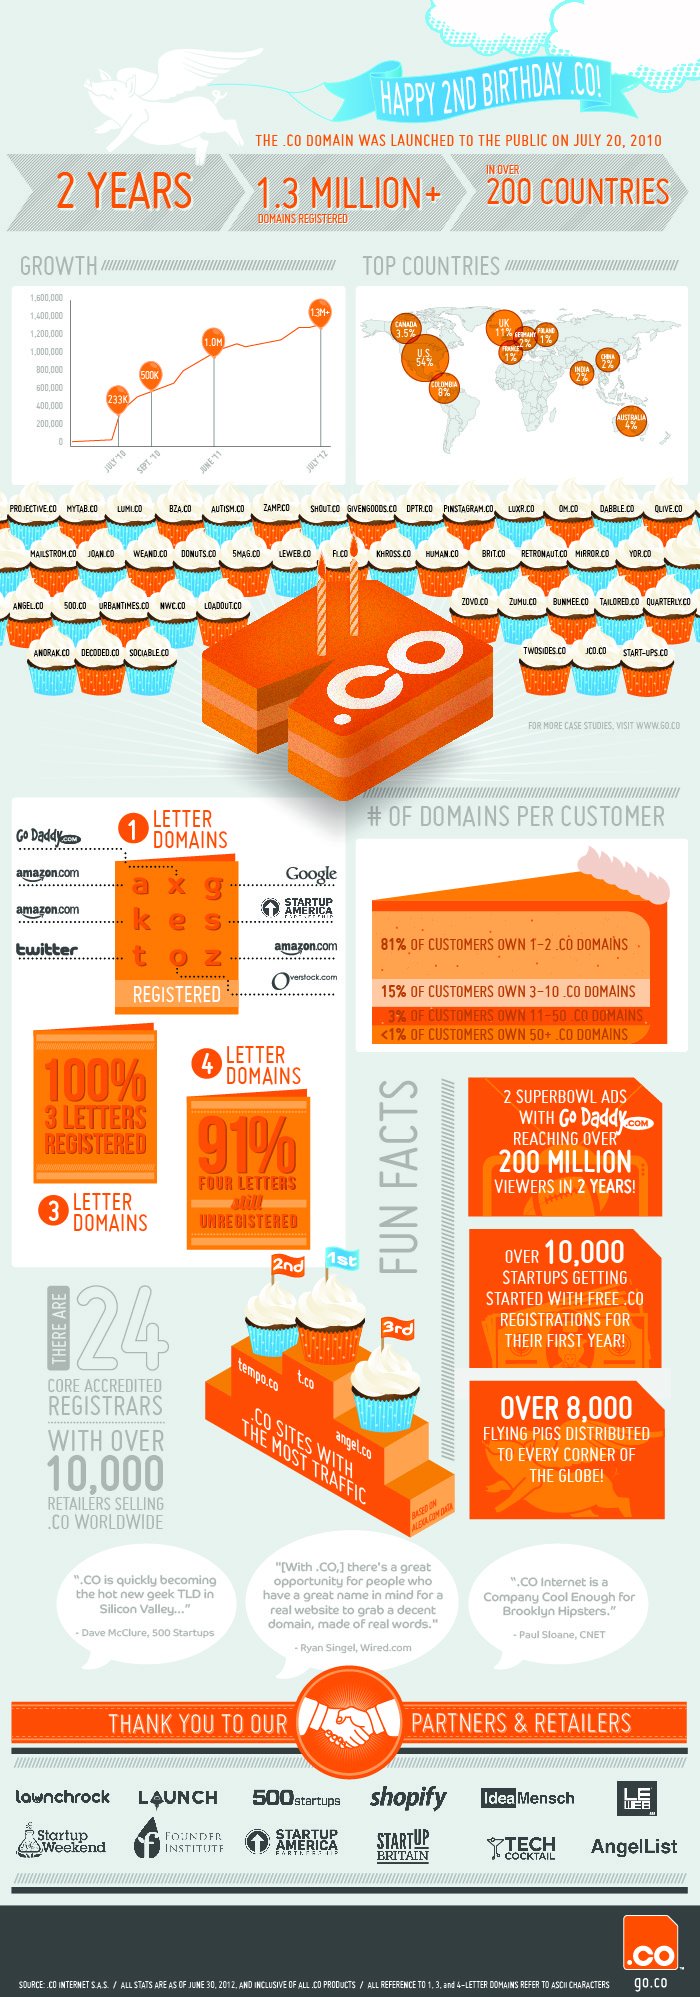 Infographic of the .co domain growth at it's 2 year anniversary 